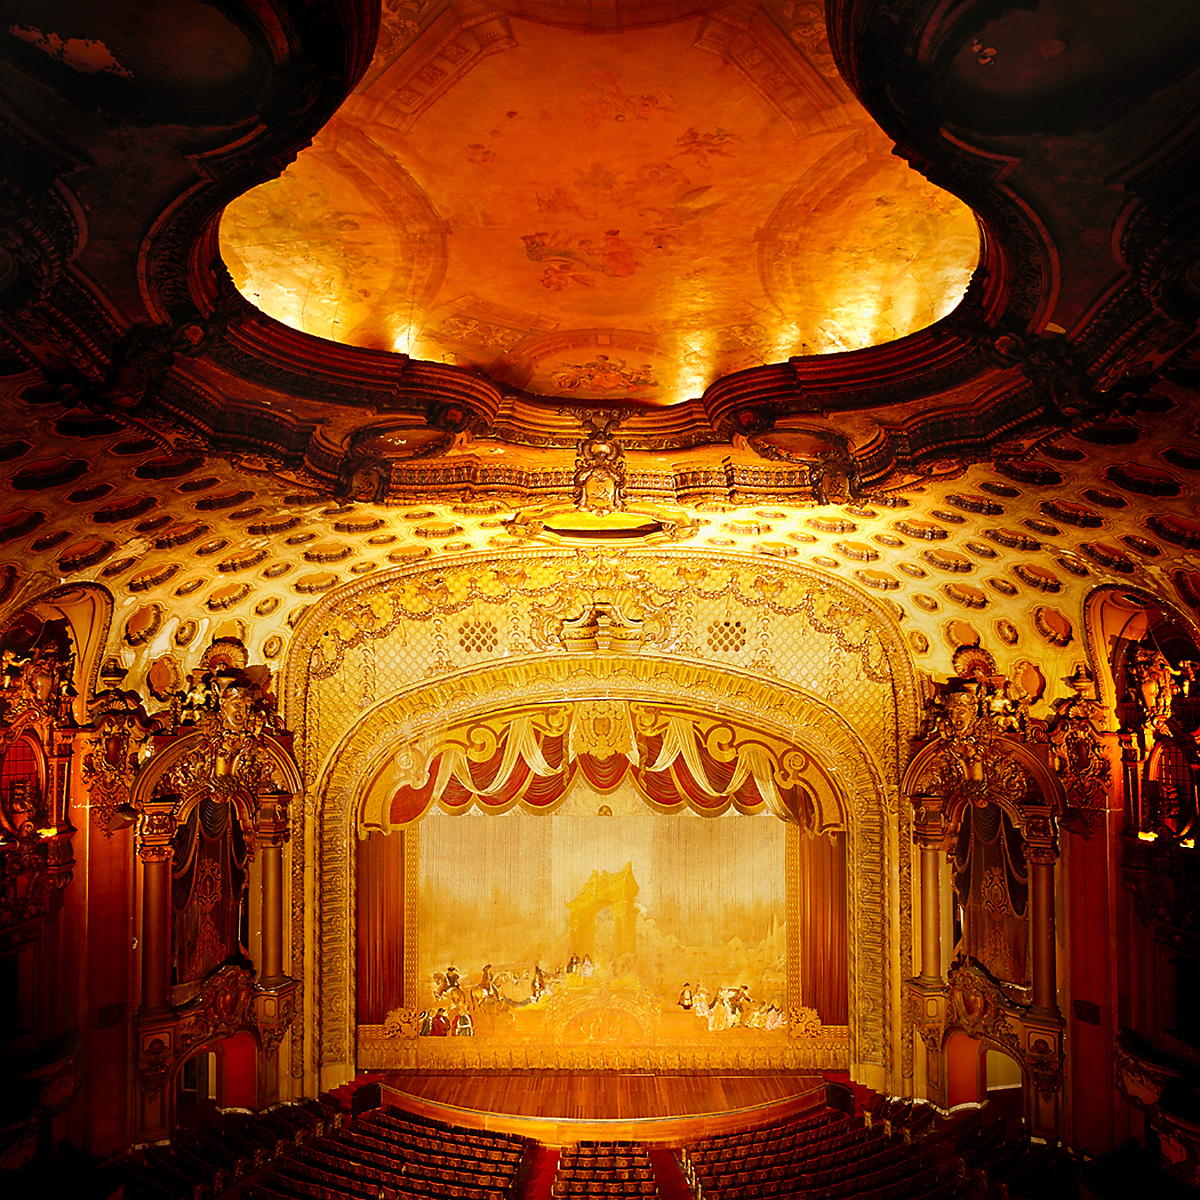 Stephen Austin Welch commercial director & advertising architectural photographer downtown Los Angeles Los Angeles Theater stage 